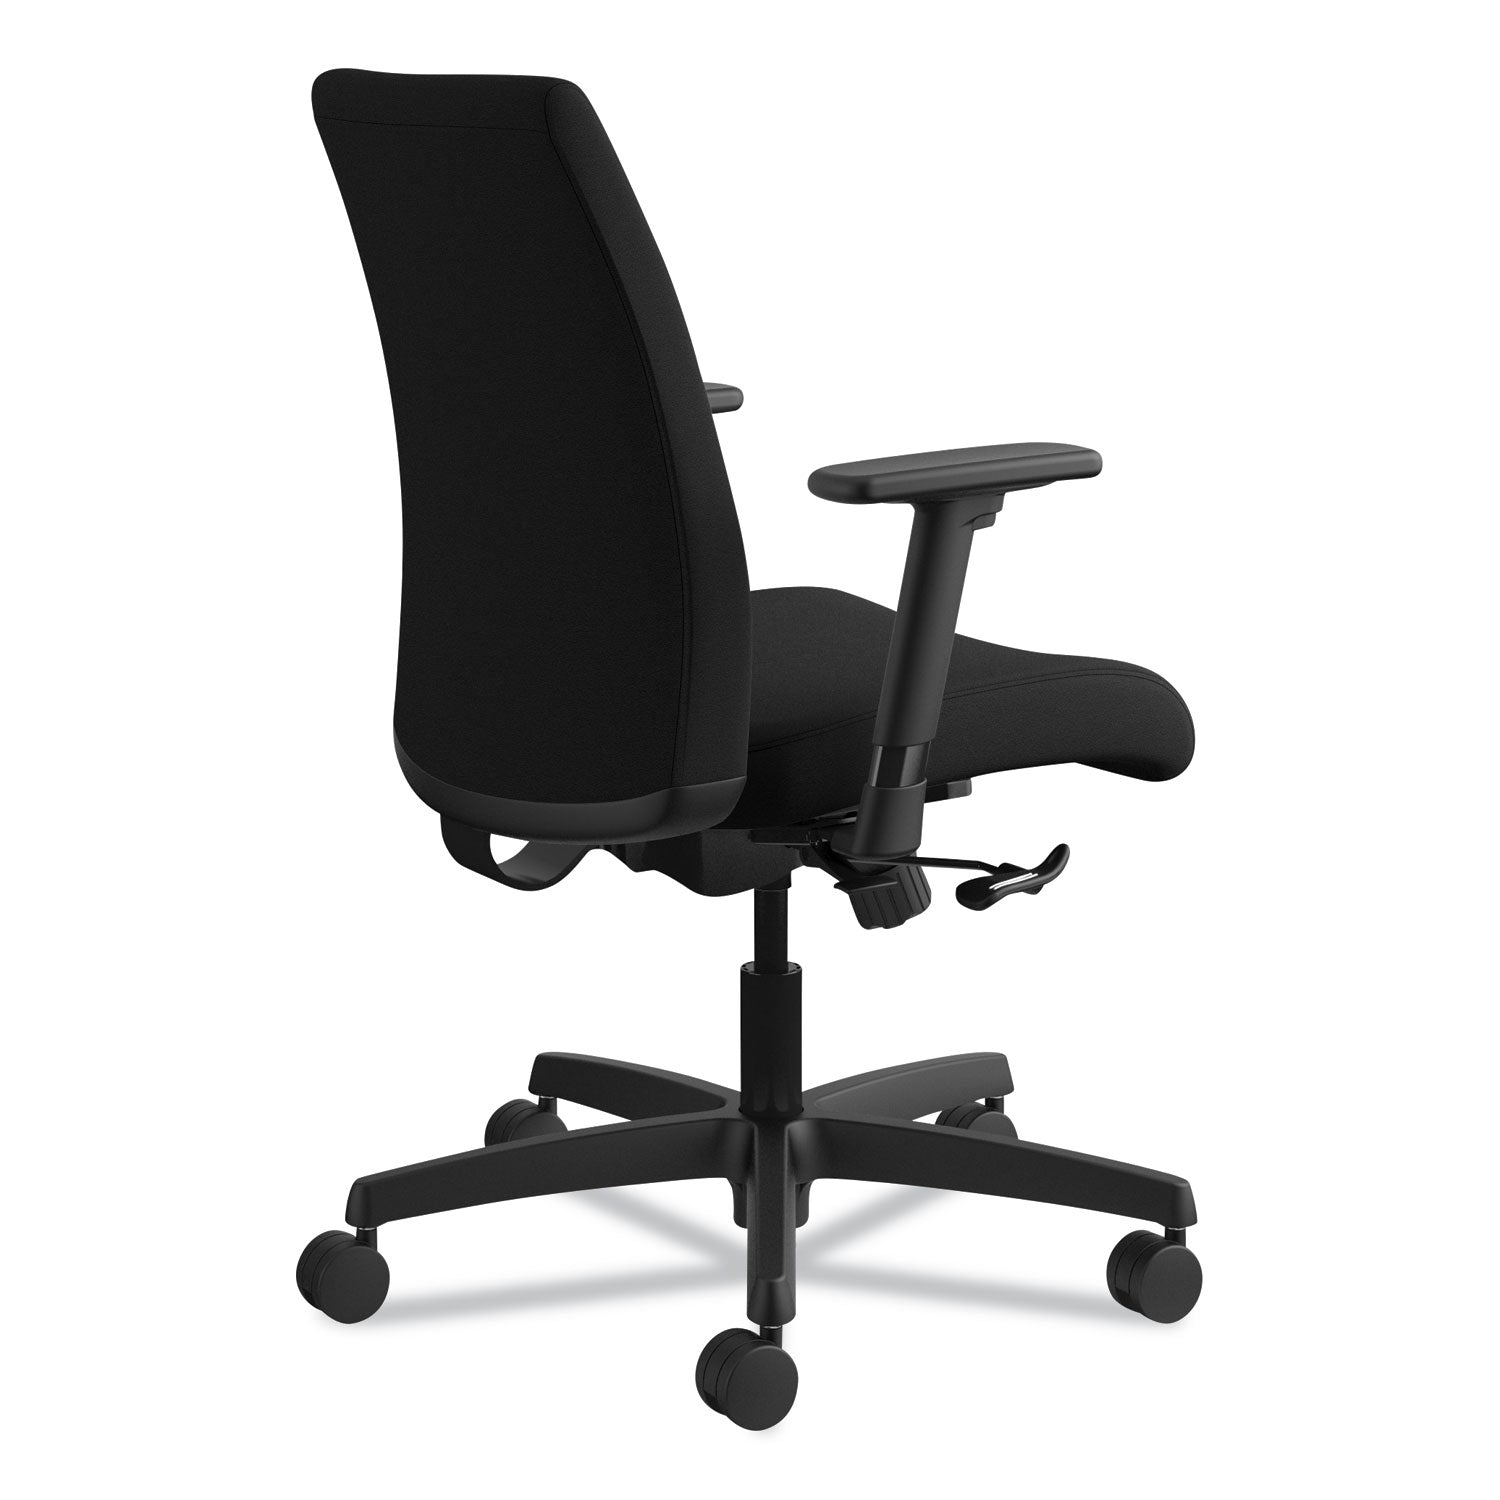 ignition-series-fabric-low-back-task-chair-supports-up-to-300-lb-17-to-215-seat-height-black_honit105cu10 - 5